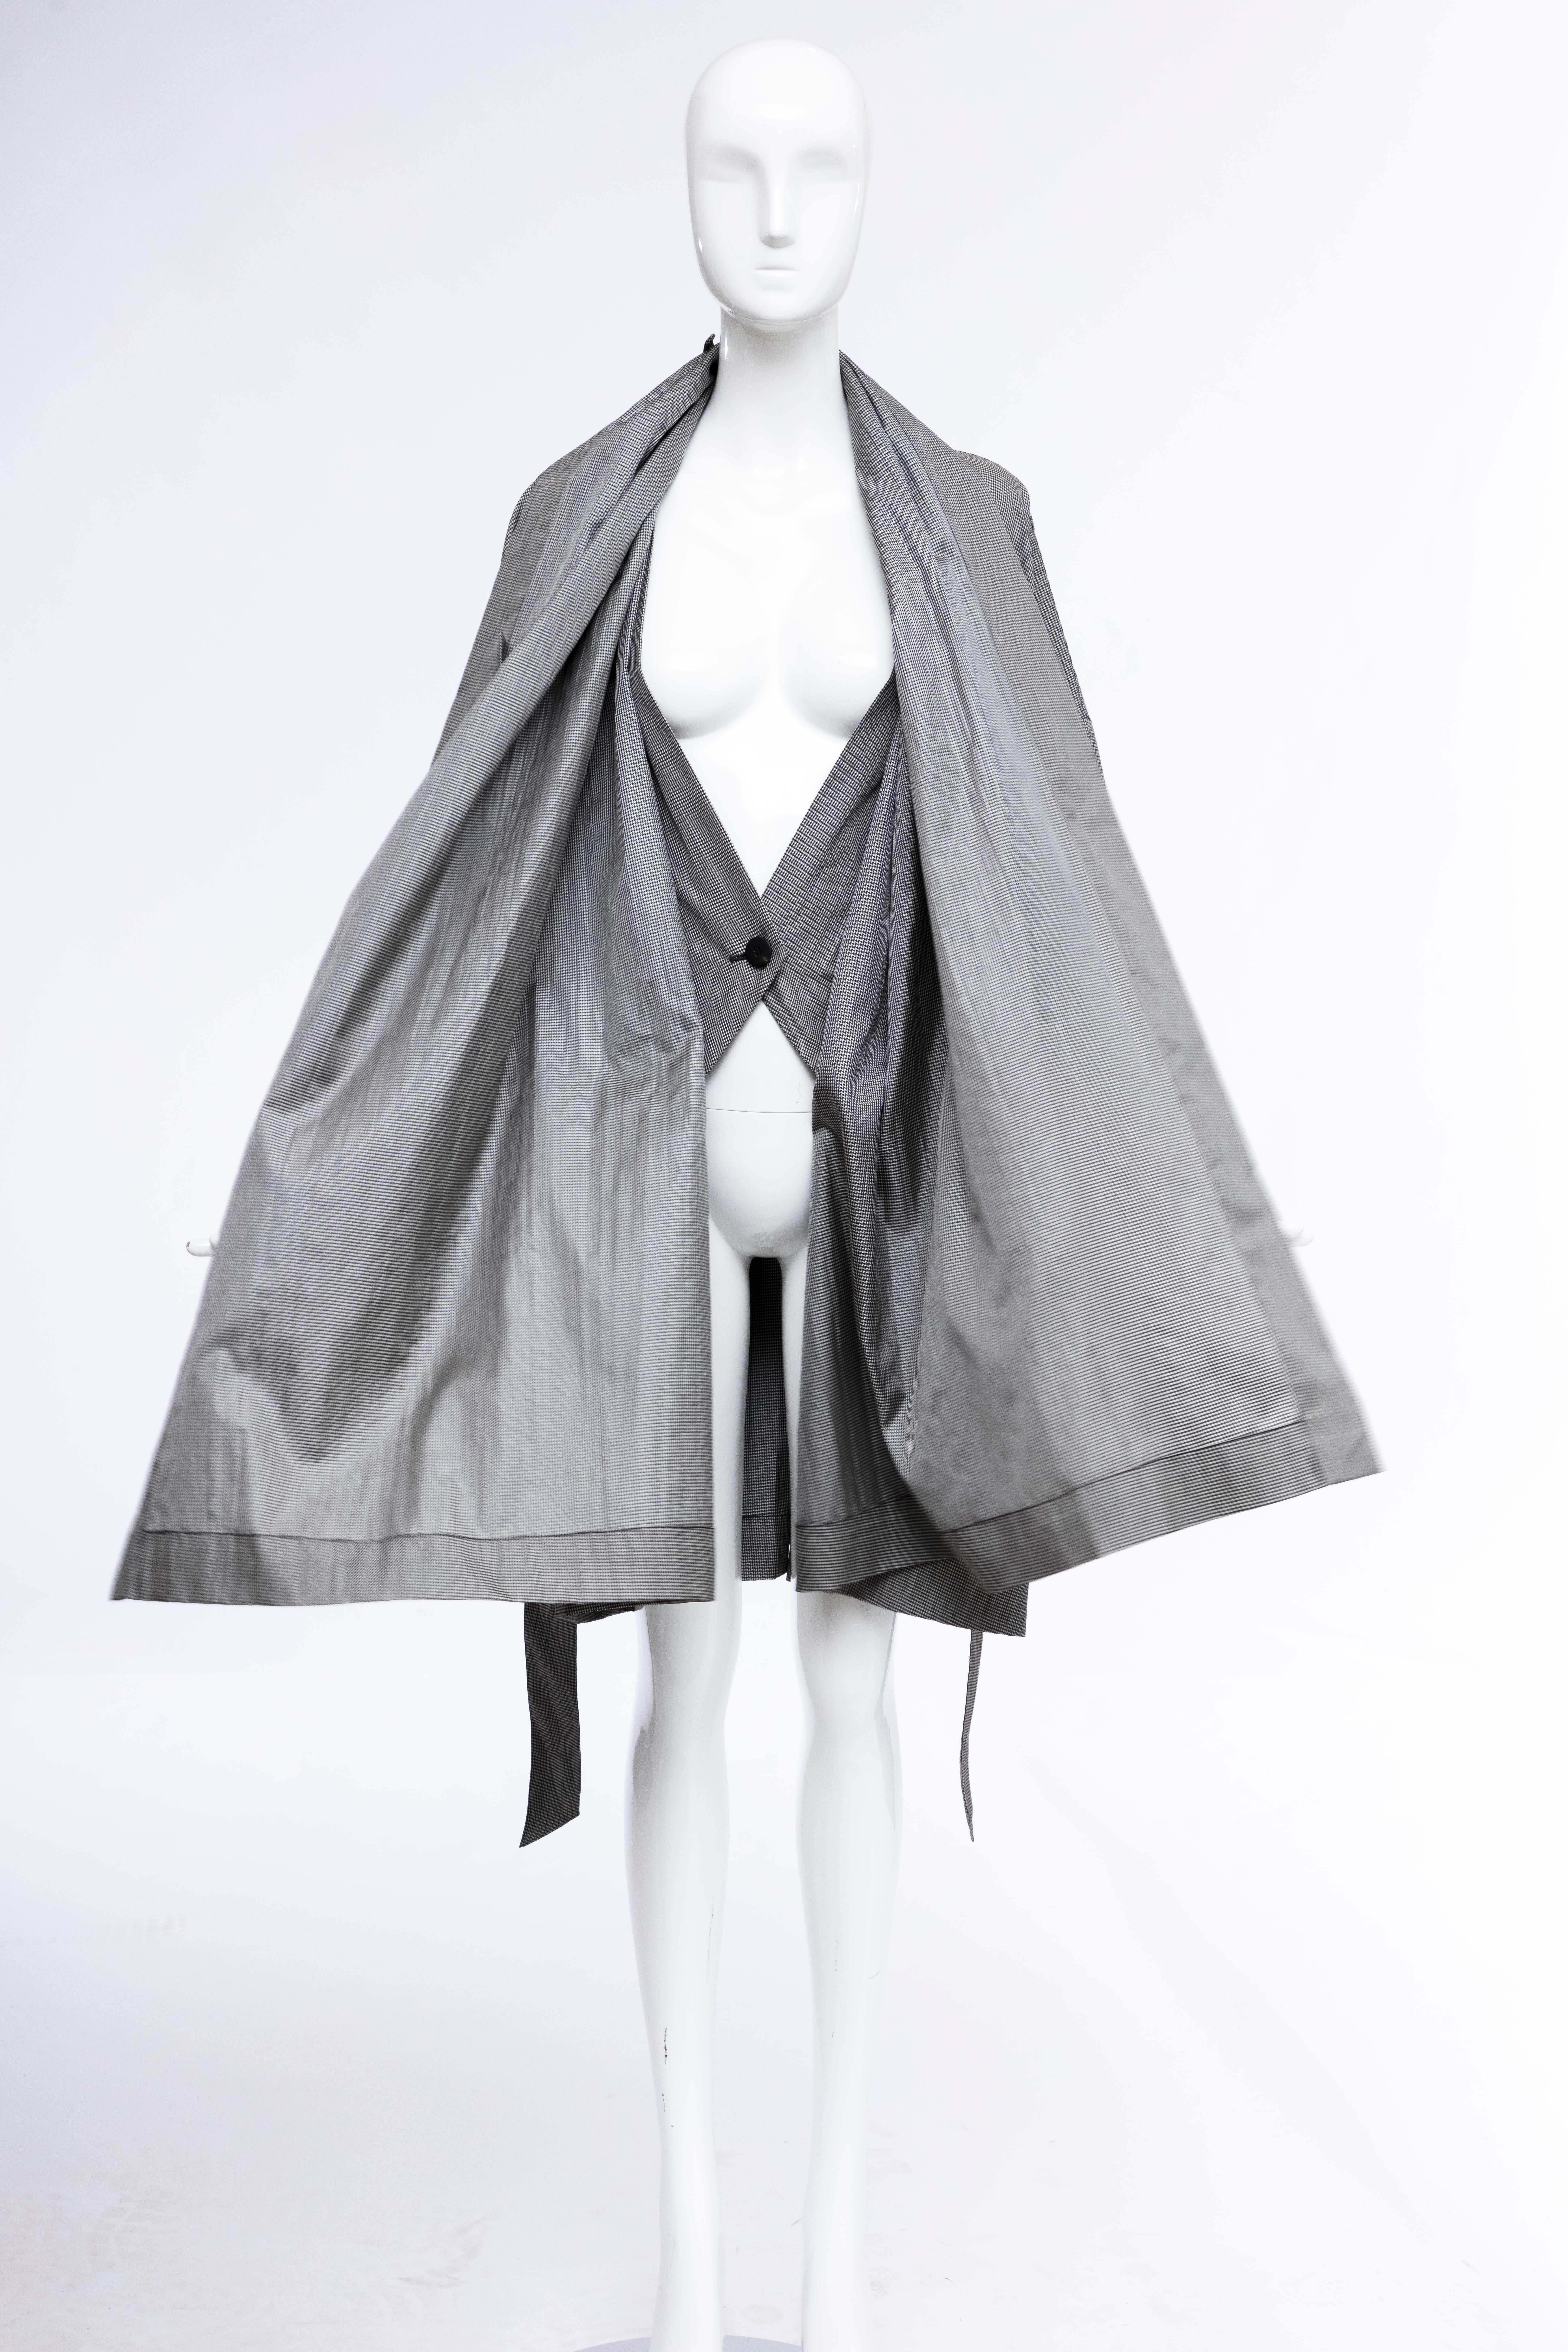 Issey Miyake Houndstooth Trench Coat Metropolitan of Art Collection, Circa 1985 For Sale 3